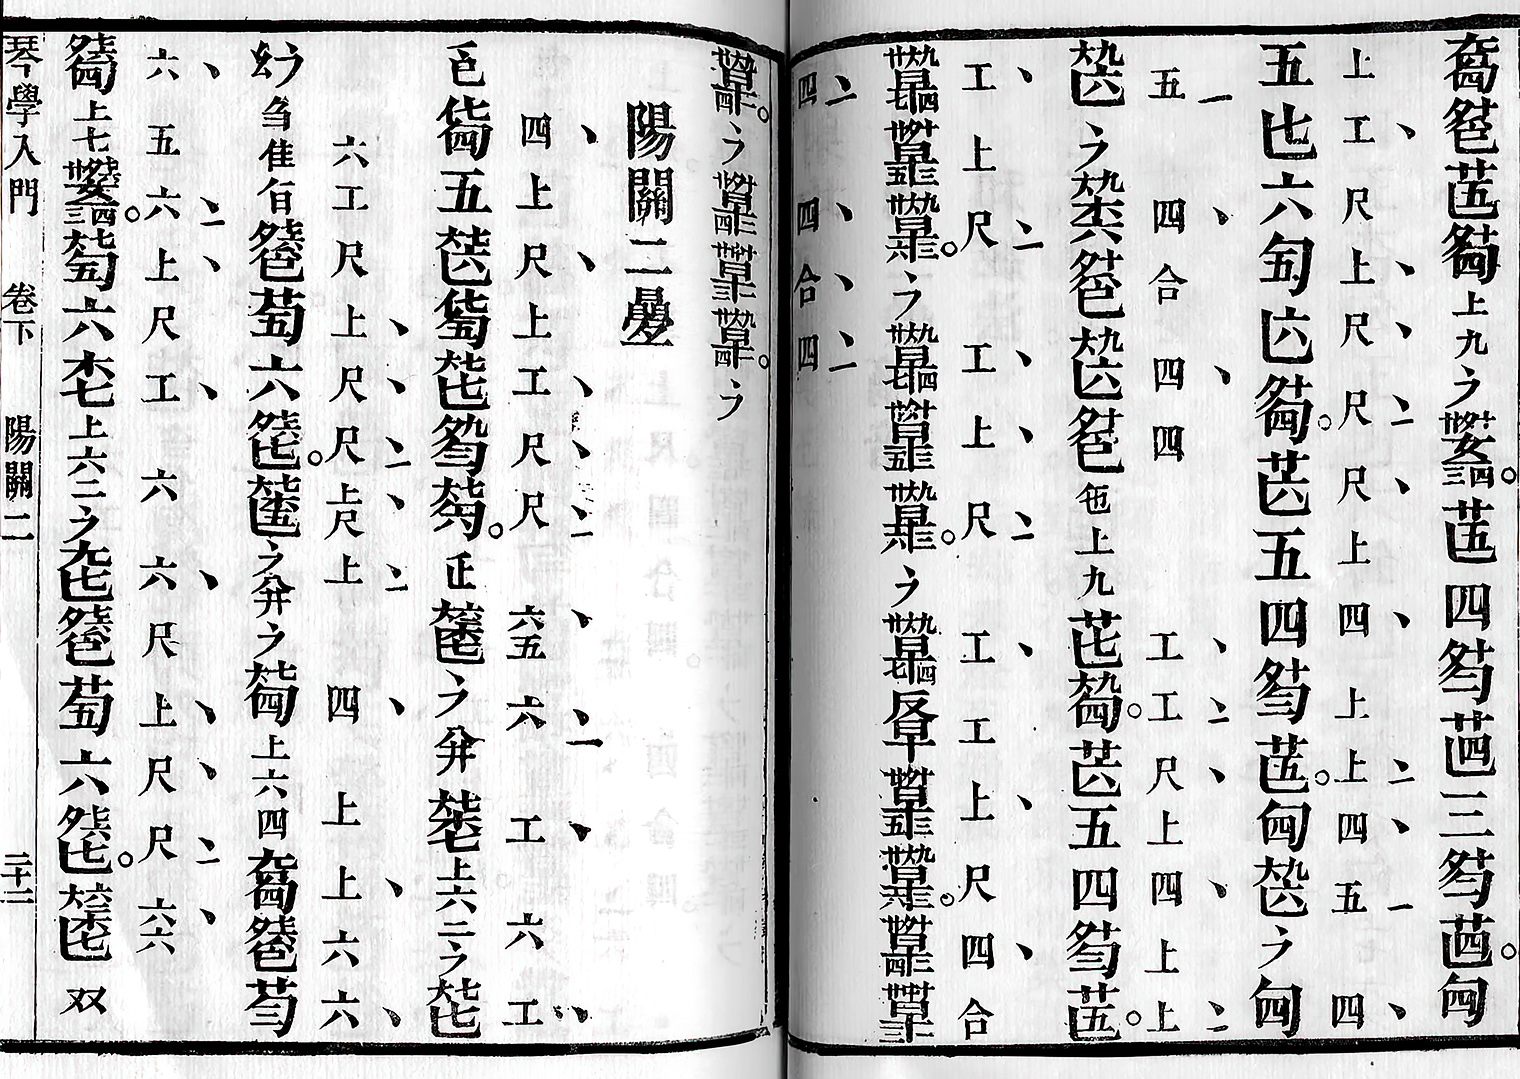 Gongche notation (1864) | Large characters are guqin tablature, smaller characters are Gongche (pitches), and dashes are rhythmic accents. | Wikimedia Commons